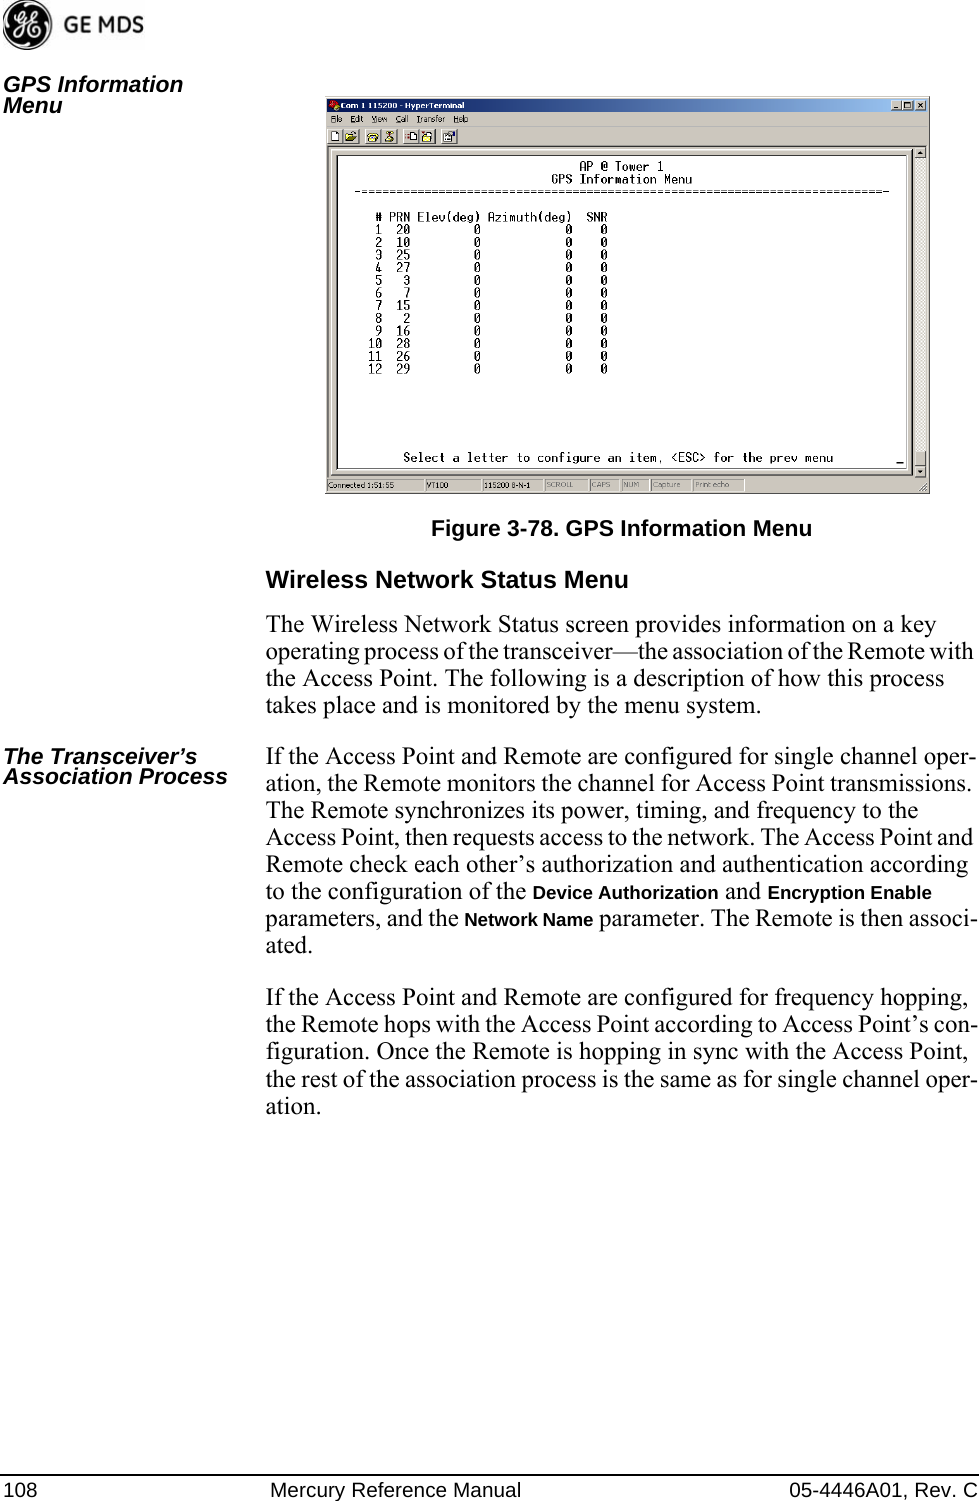 108 Mercury Reference Manual 05-4446A01, Rev. CGPS Information Menu Invisible place holderFigure 3-78. GPS Information MenuWireless Network Status MenuThe Wireless Network Status screen provides information on a key operating process of the transceiver—the association of the Remote with the Access Point. The following is a description of how this process takes place and is monitored by the menu system.The Transceiver’s Association Process If the Access Point and Remote are configured for single channel oper-ation, the Remote monitors the channel for Access Point transmissions. The Remote synchronizes its power, timing, and frequency to the Access Point, then requests access to the network. The Access Point and Remote check each other’s authorization and authentication according to the configuration of the Device Authorization and Encryption Enable parameters, and the Network Name parameter. The Remote is then associ-ated.If the Access Point and Remote are configured for frequency hopping, the Remote hops with the Access Point according to Access Point’s con-figuration. Once the Remote is hopping in sync with the Access Point, the rest of the association process is the same as for single channel oper-ation. 